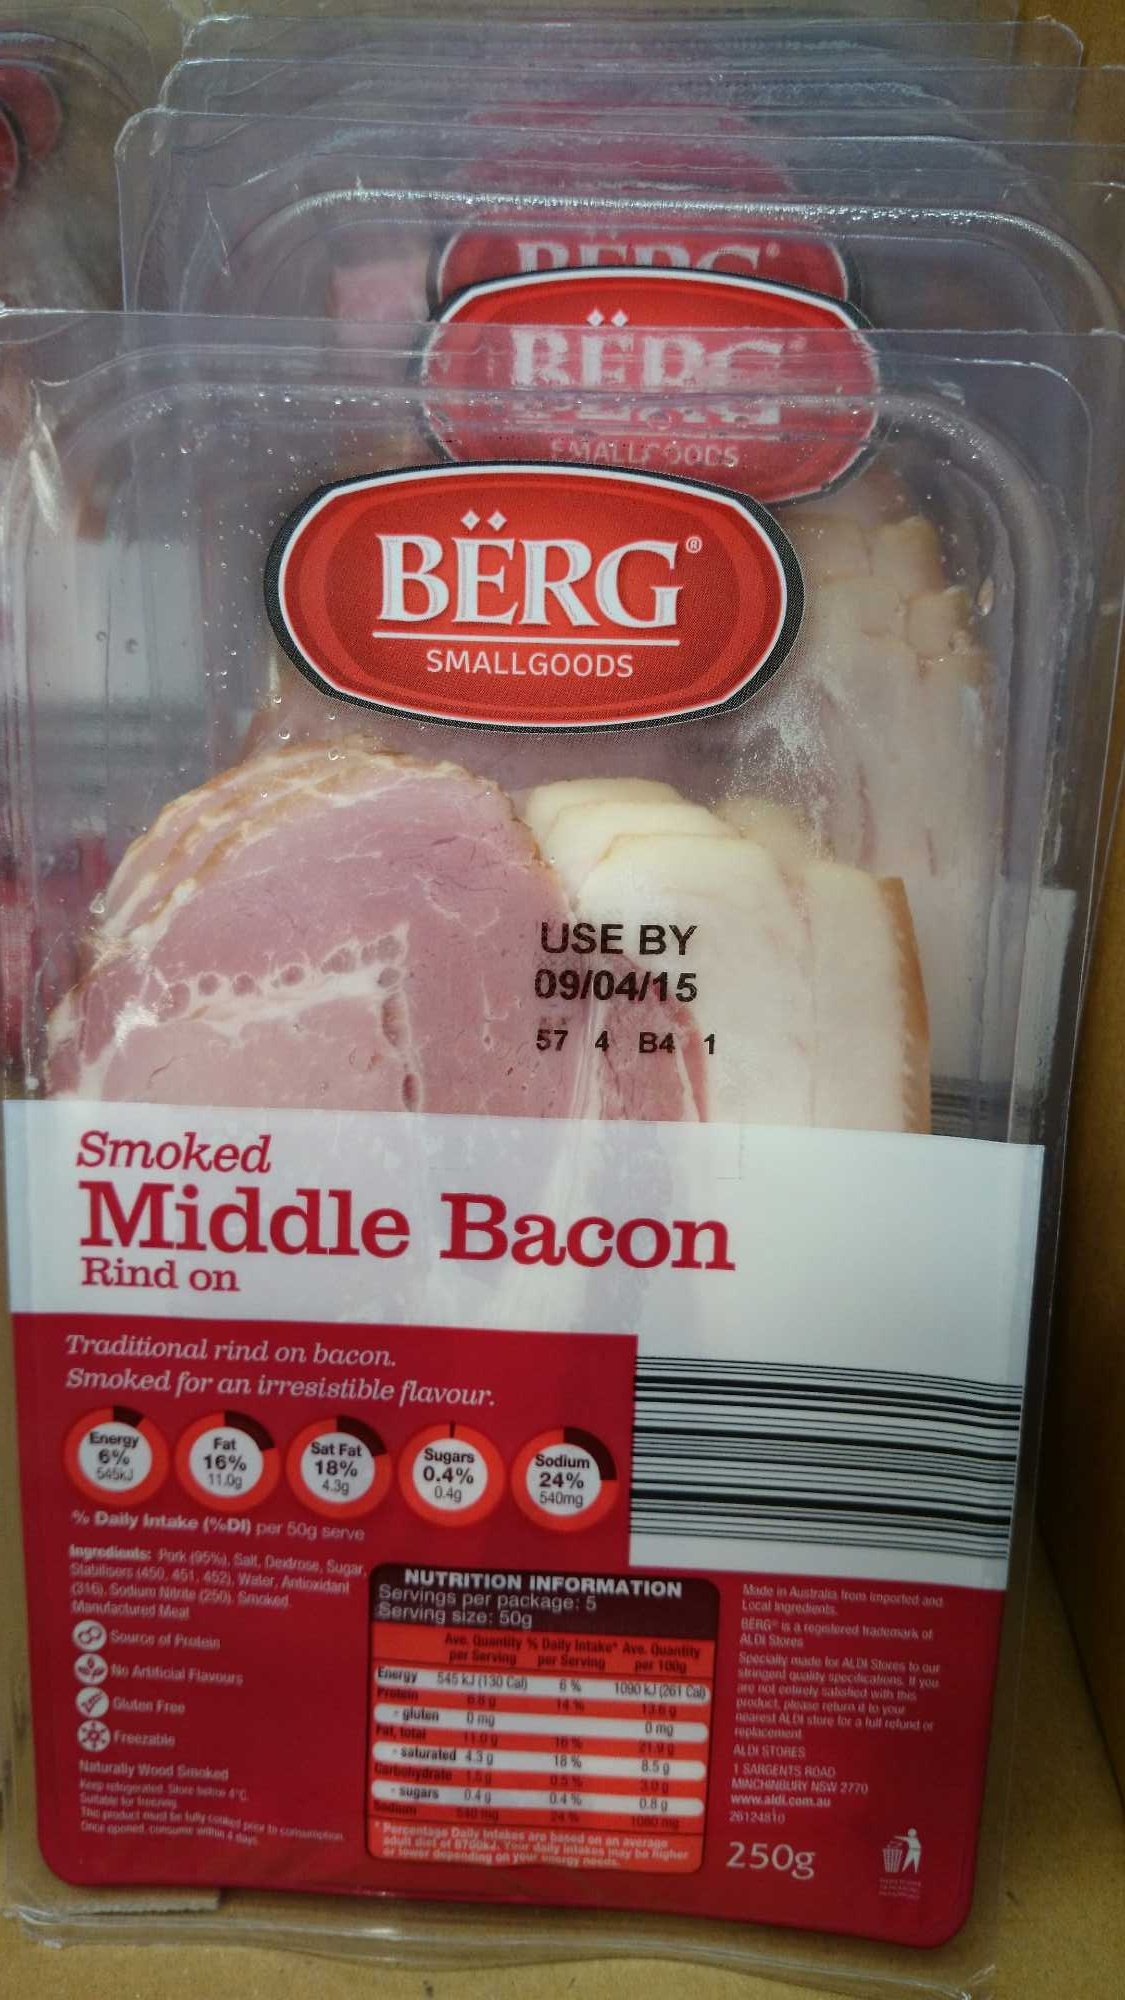 Smoked Middle Bacon Rind On - Product - en